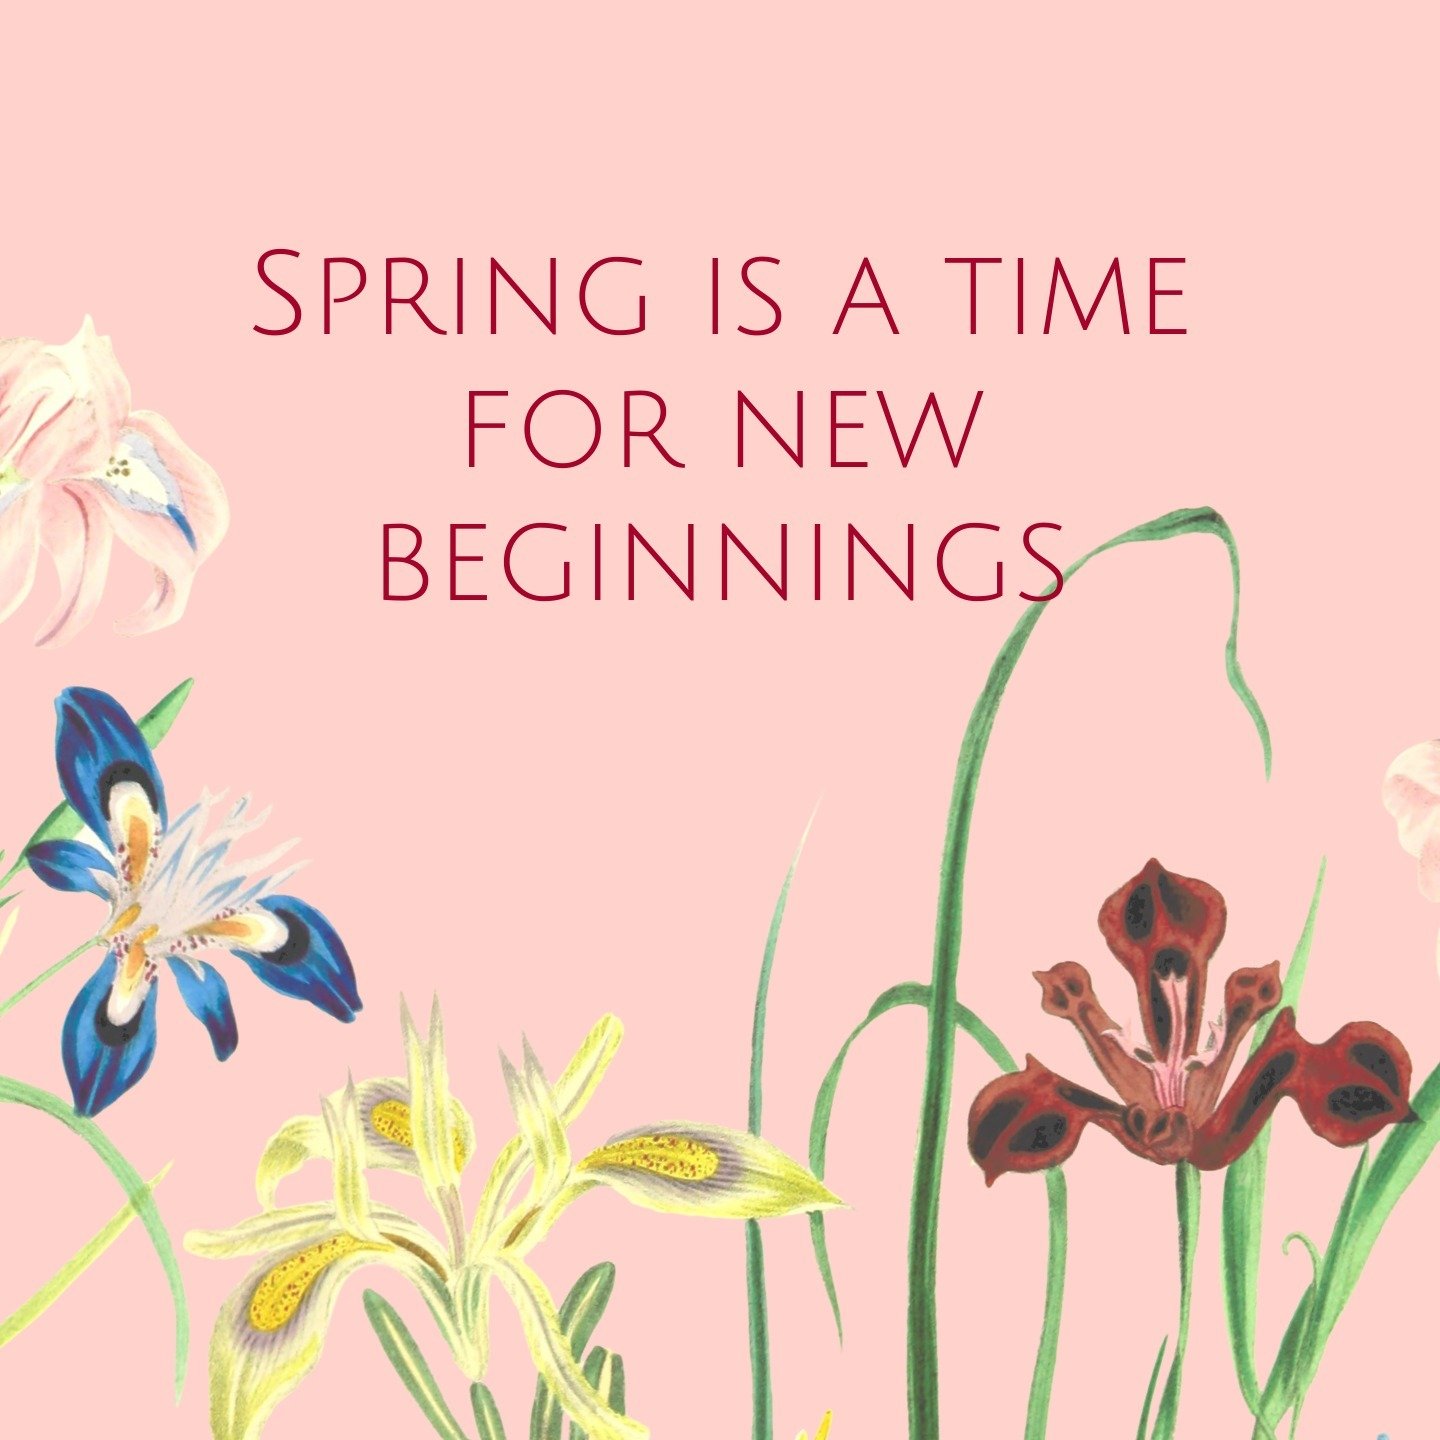 I love spring! I love watching the trees' leaves unfurl and the tulips sprout up with colour! The cherry blossoms smell amazing and the birds are chirping. It's a full sensory experience. It's also a great time for bringing in new energy.

This made 